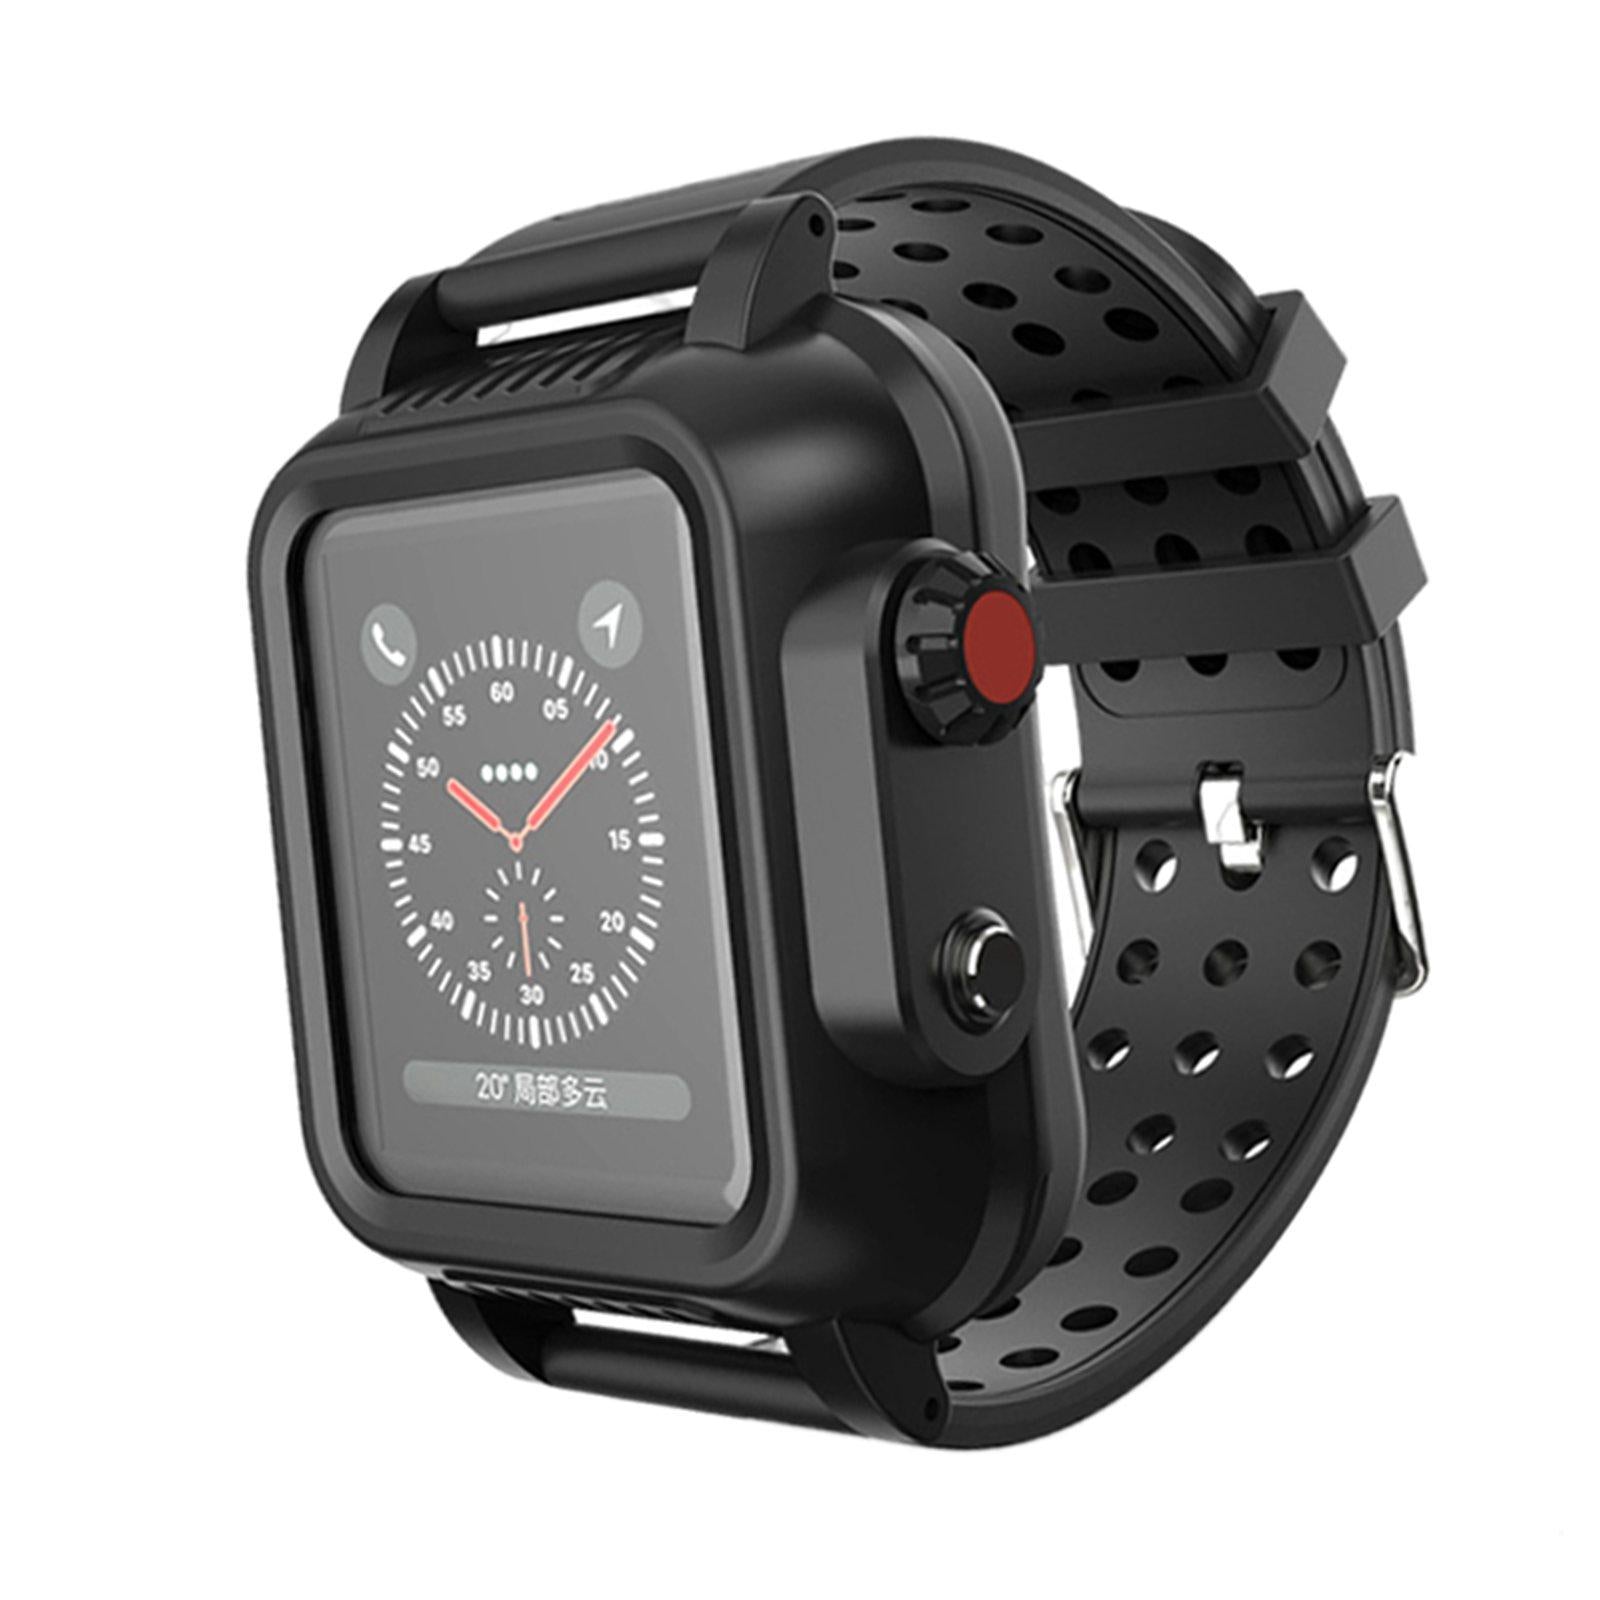 Rugged Protective Case Shockproof Durable for Apple Watch 3rd 4th Generation strap width 42mm